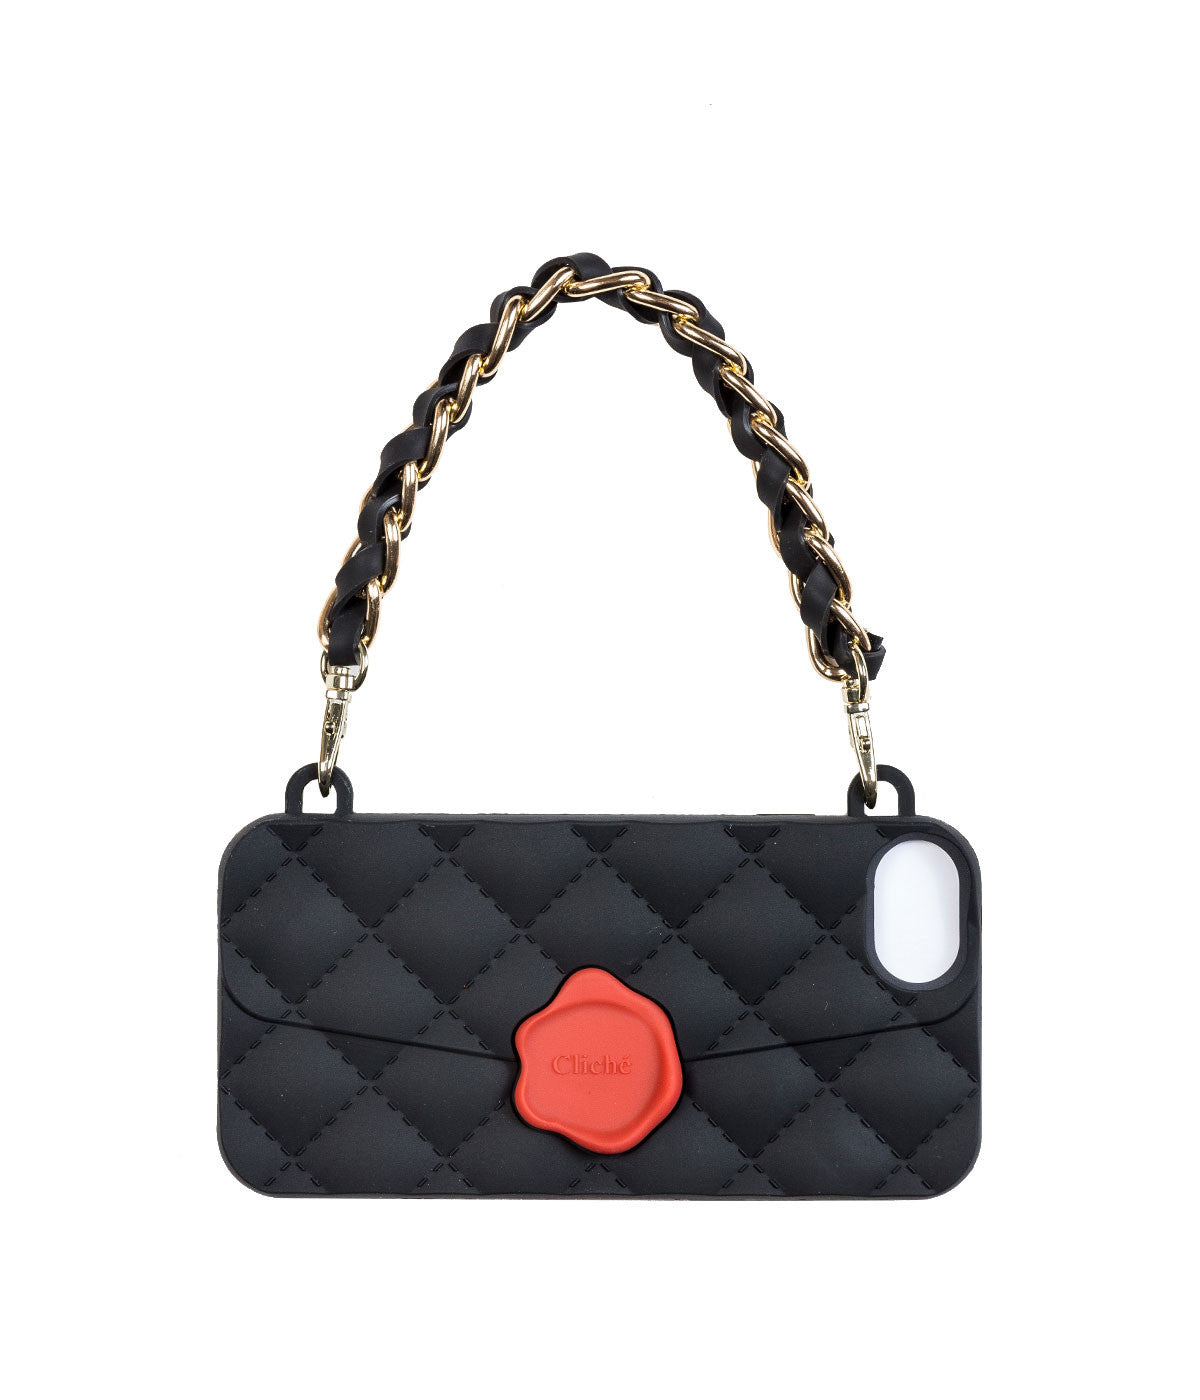 Black Quilted Purse iPhone 7 Case